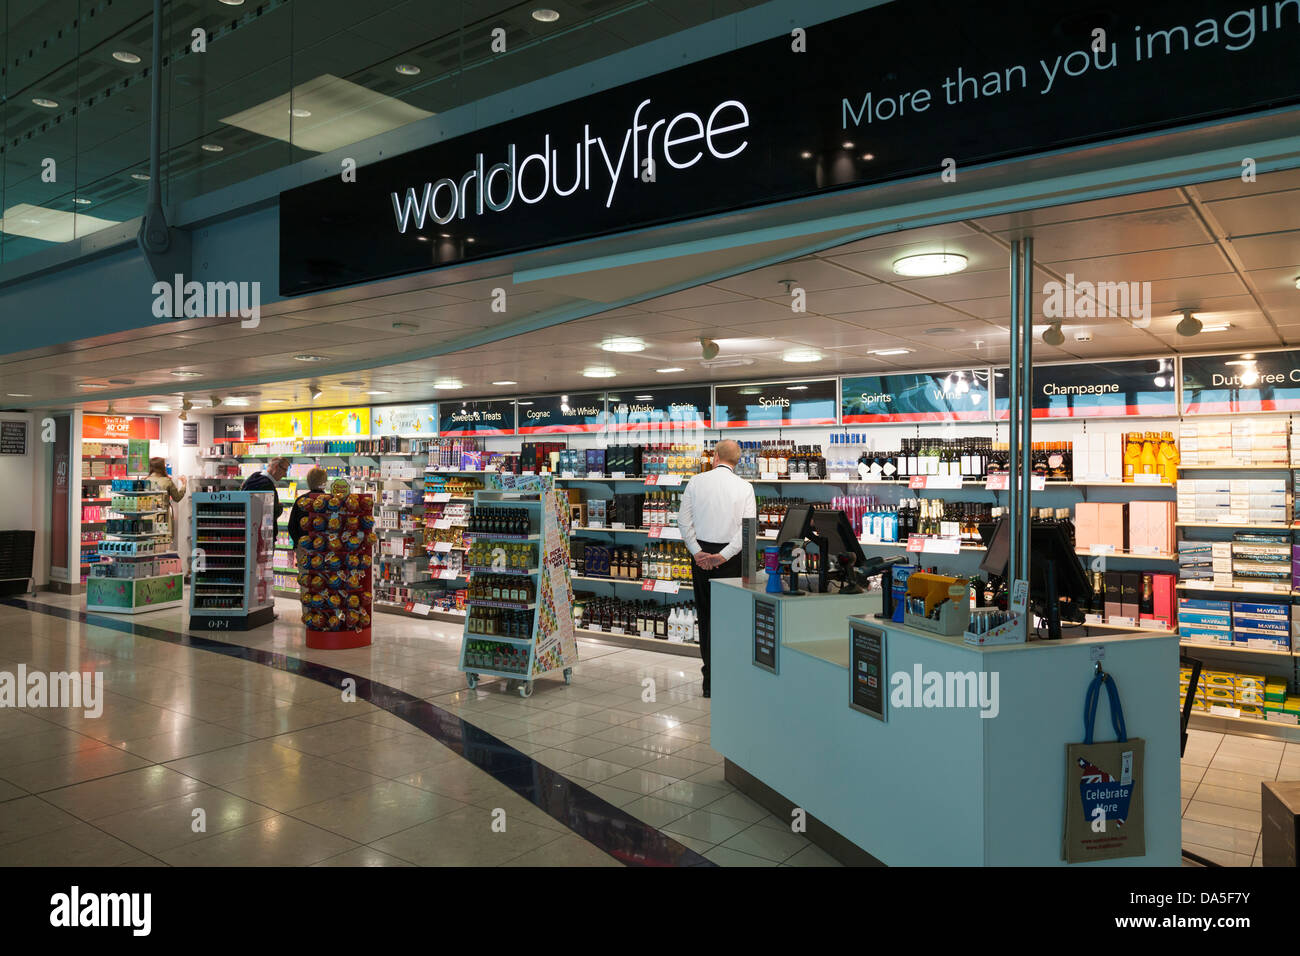 World duty free shop at airport. Stock Photo